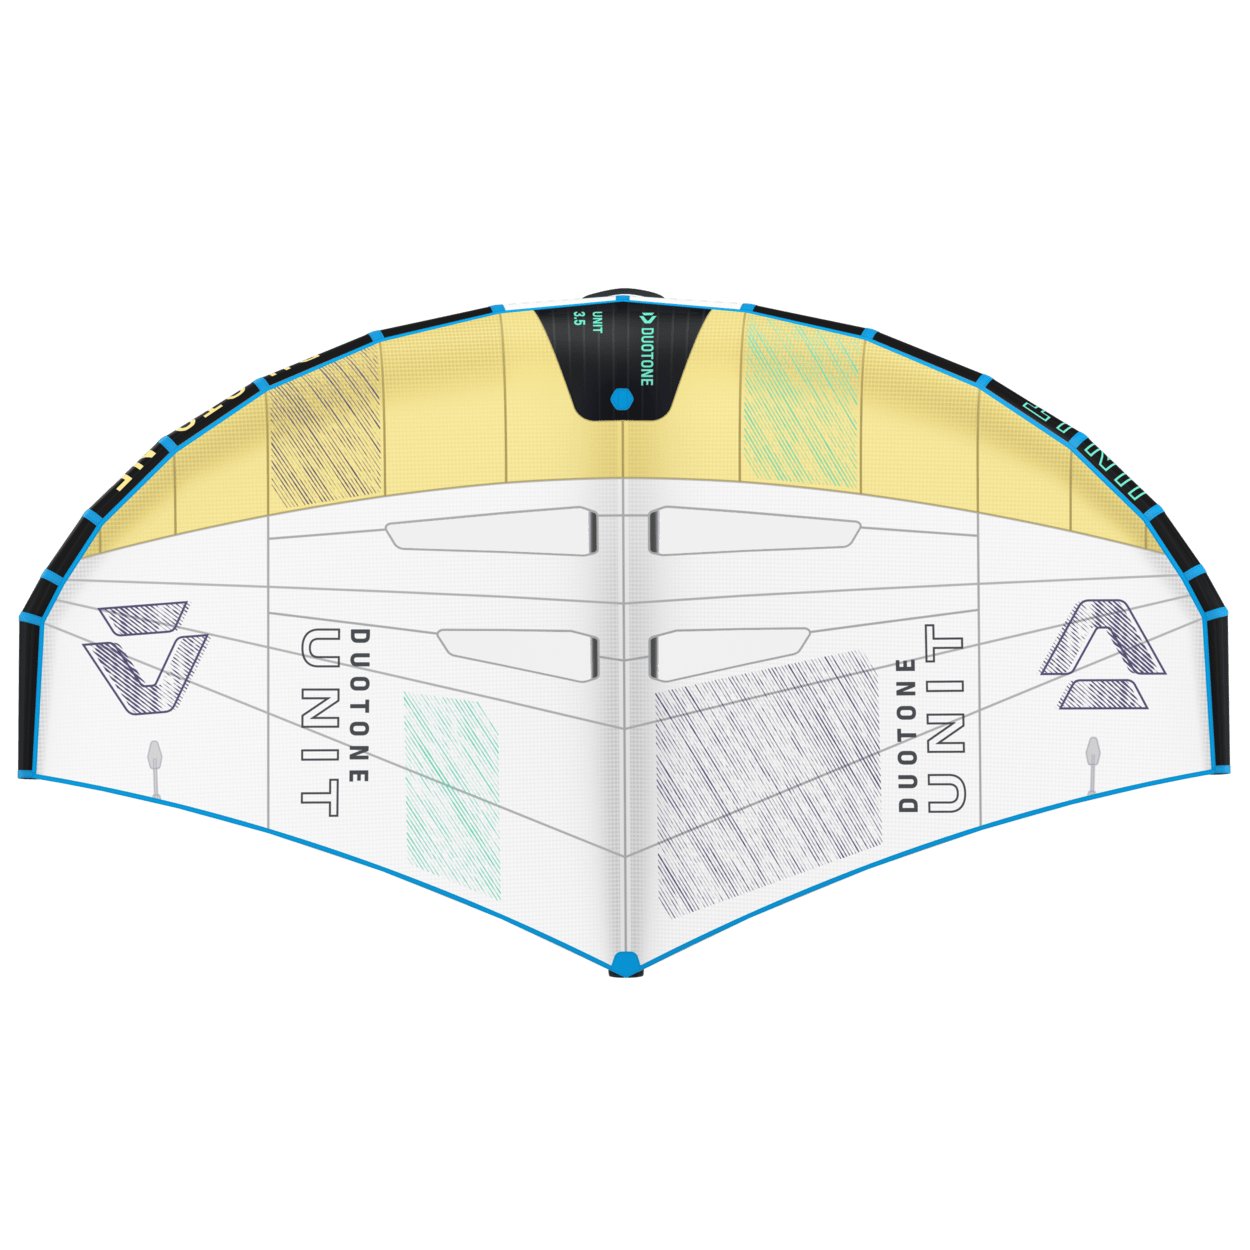 Duotone Foil Wing Unit 2023 - Worthing Watersports - 9010583139678 - Foilwing - Duotone X